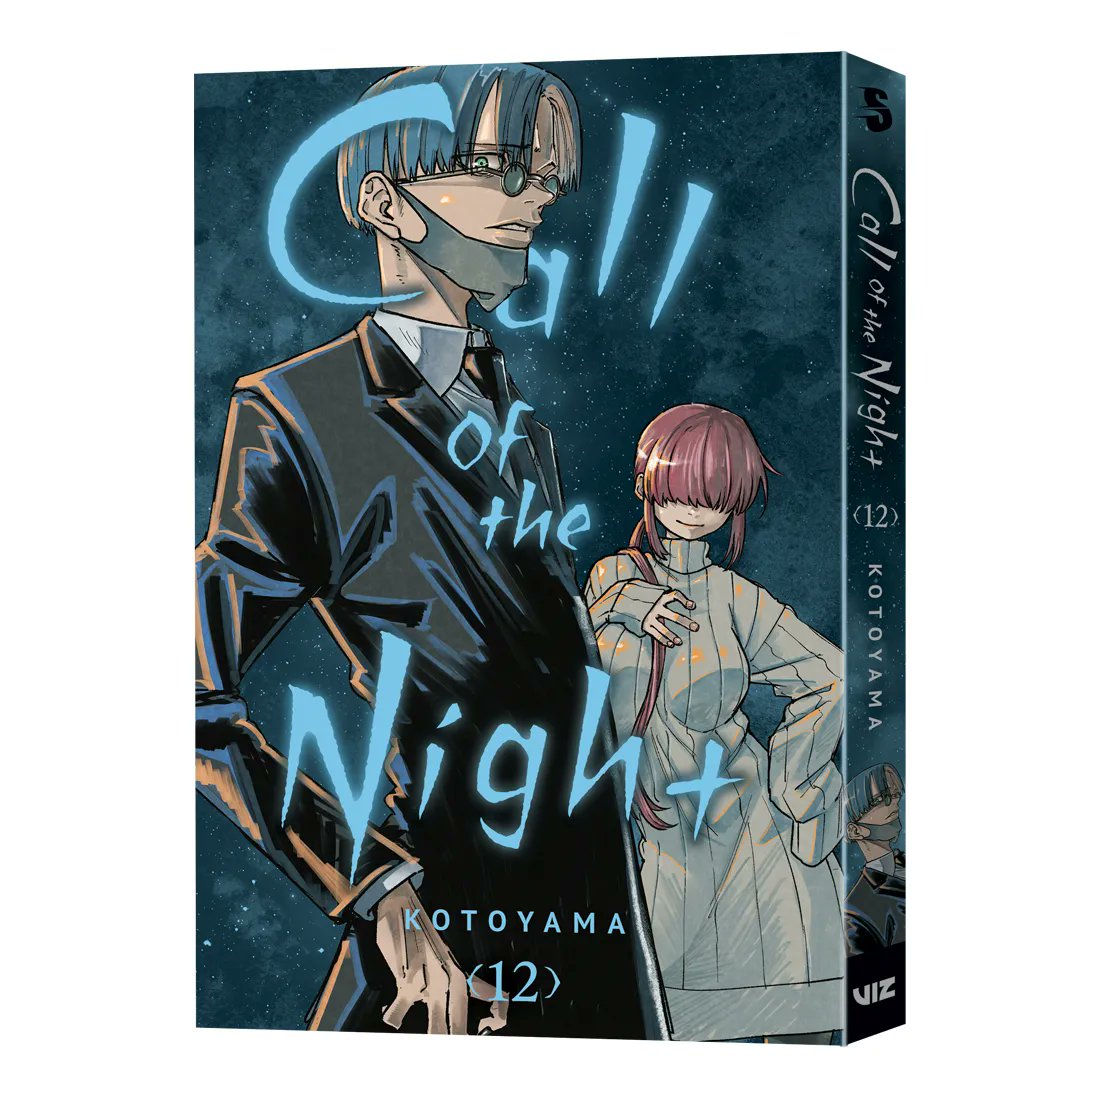 Call of the Night, Vol. 1 by Kotoyama